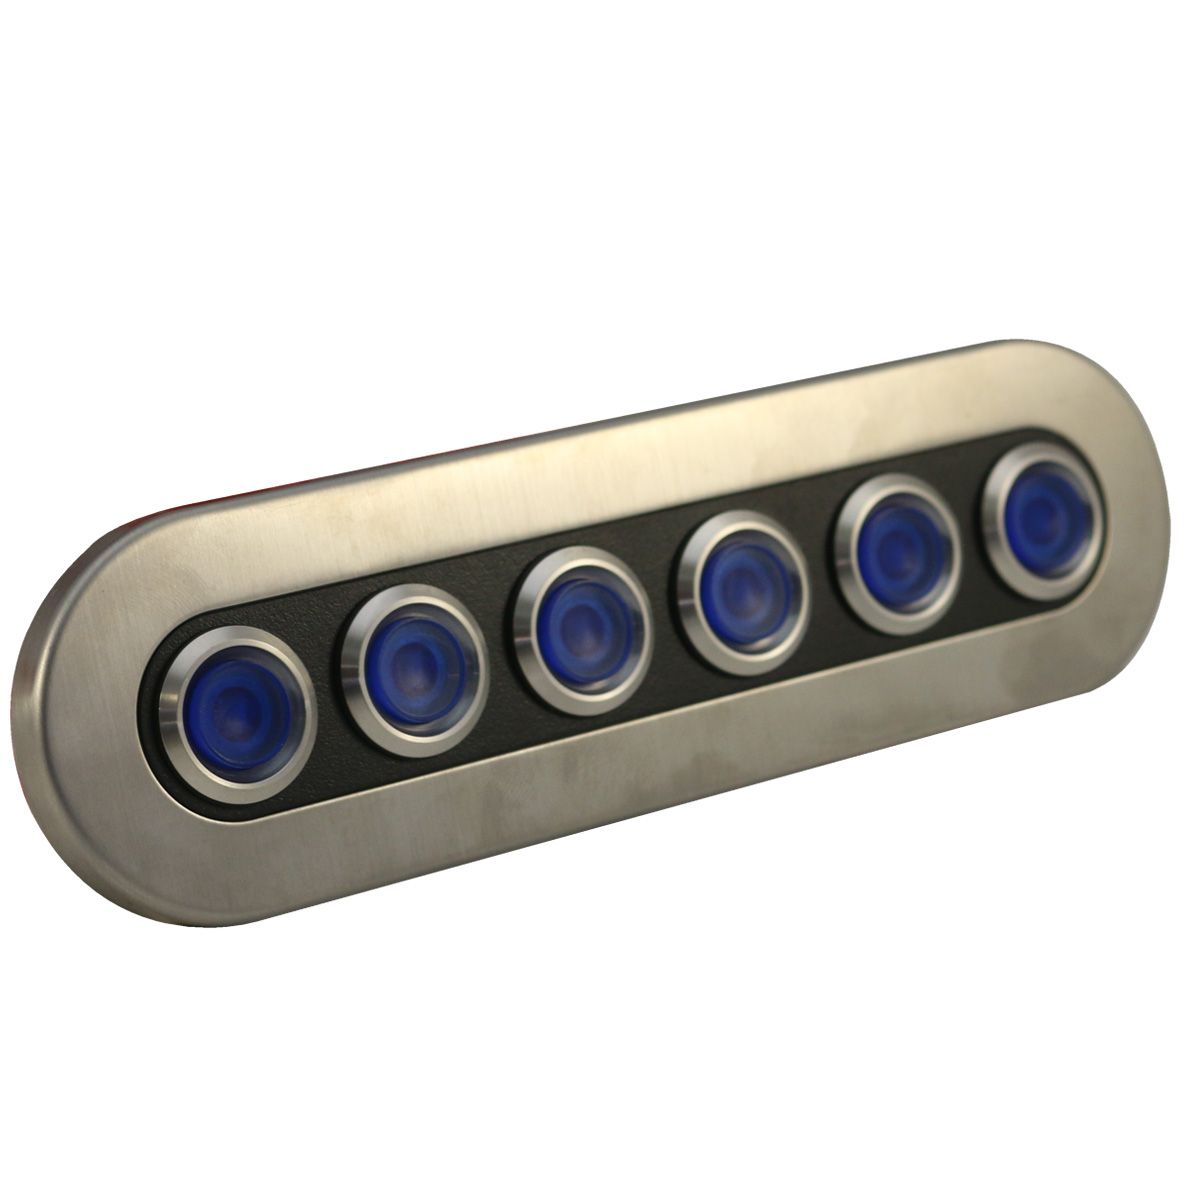 Race Sport 6-Button 60-Amp On-Off Waterproof Stainless Steel Switch Panel with Pre-Wired and Fused Blue LED On-Off Switches MS6BSS